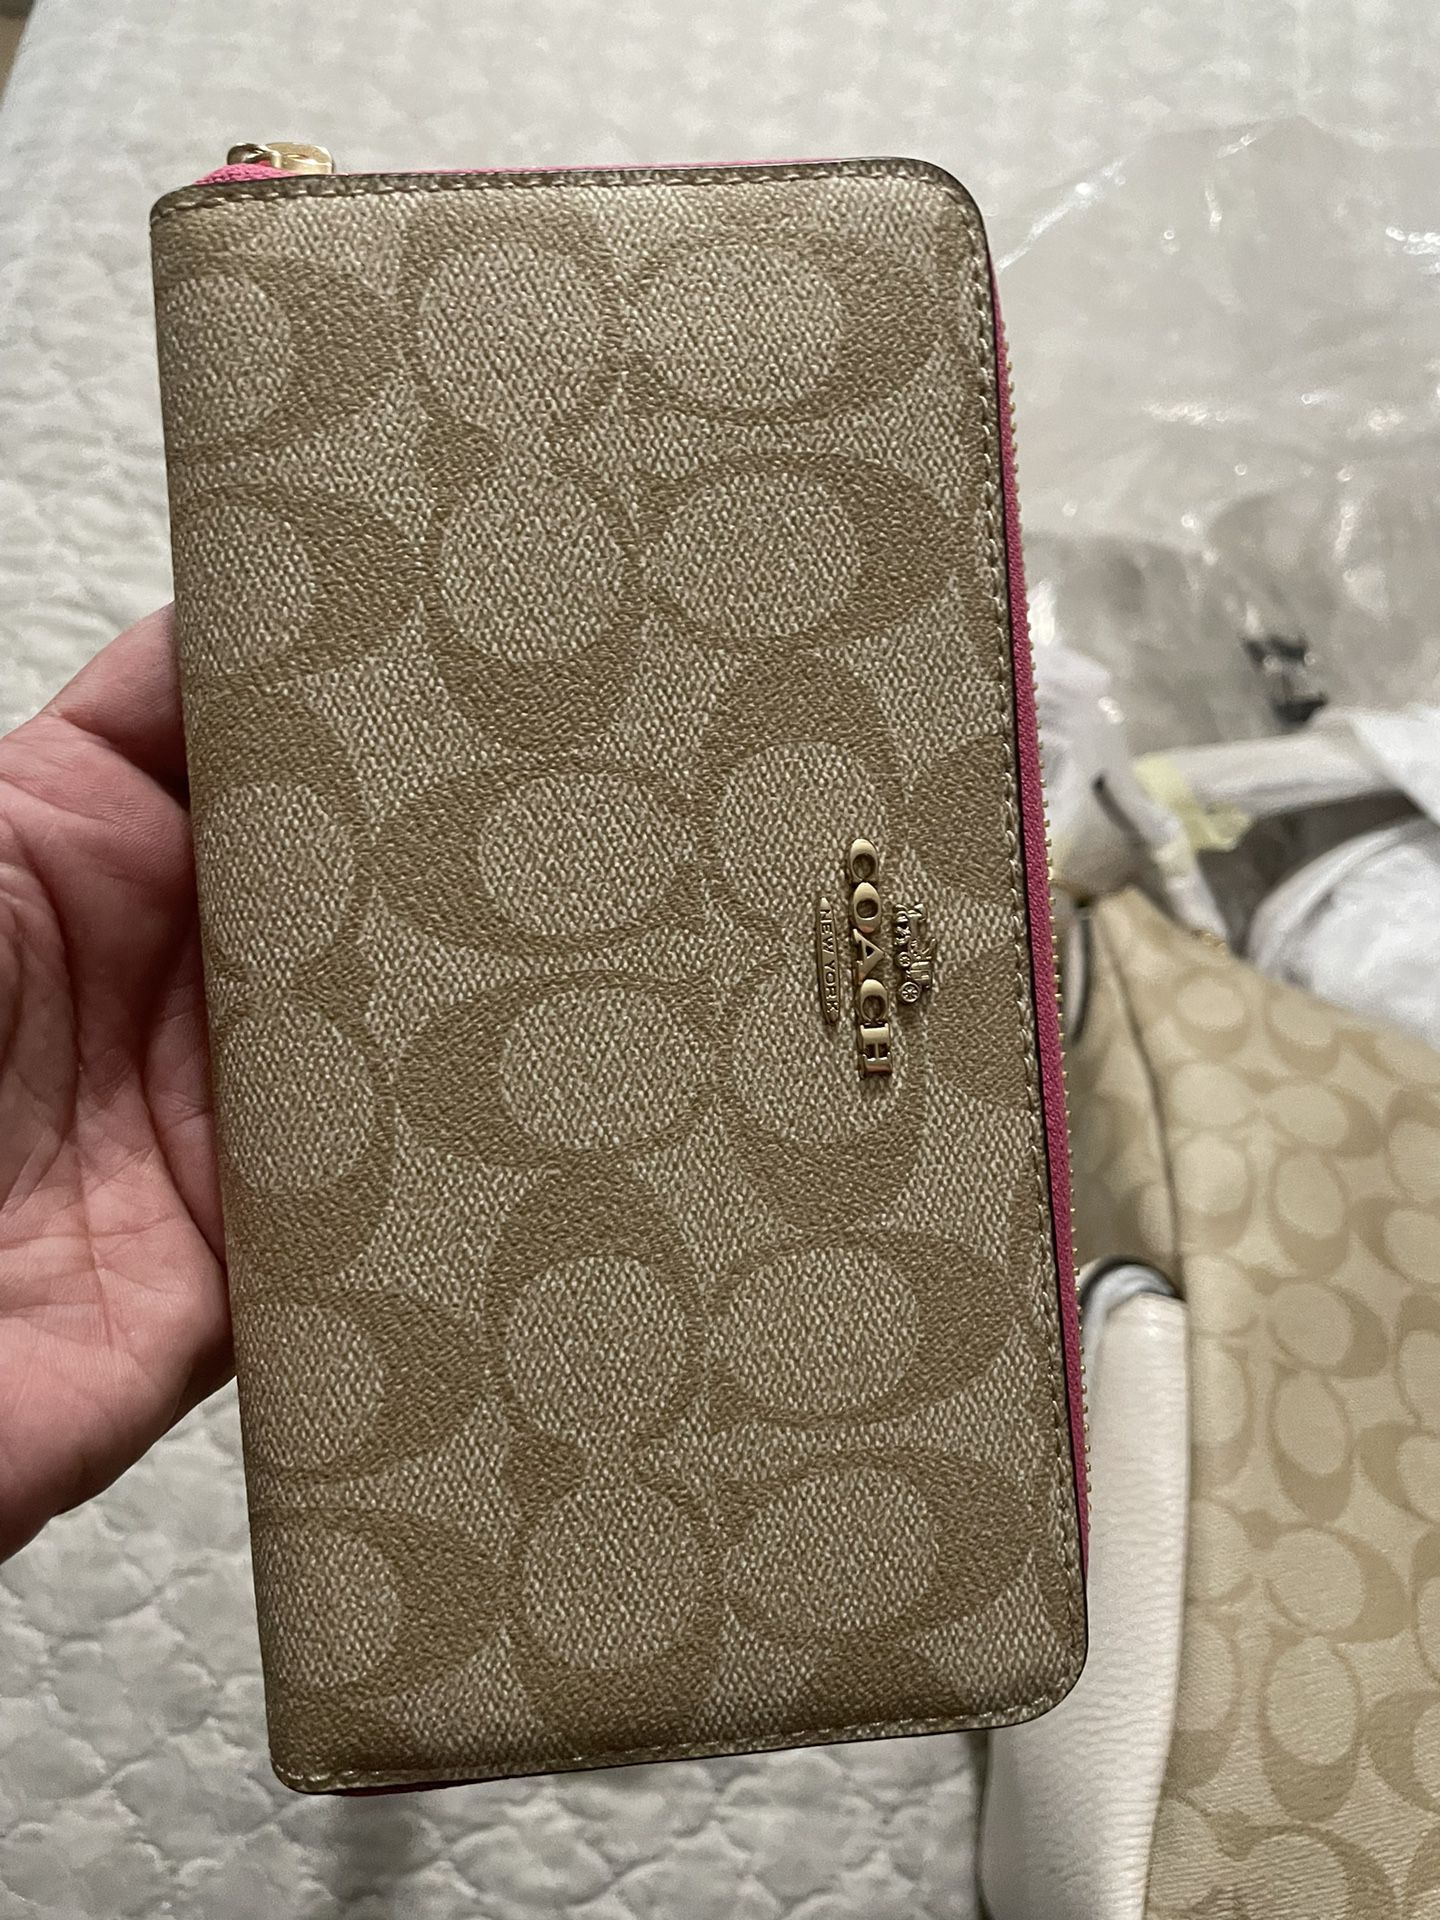 Coach Purse And Wallet